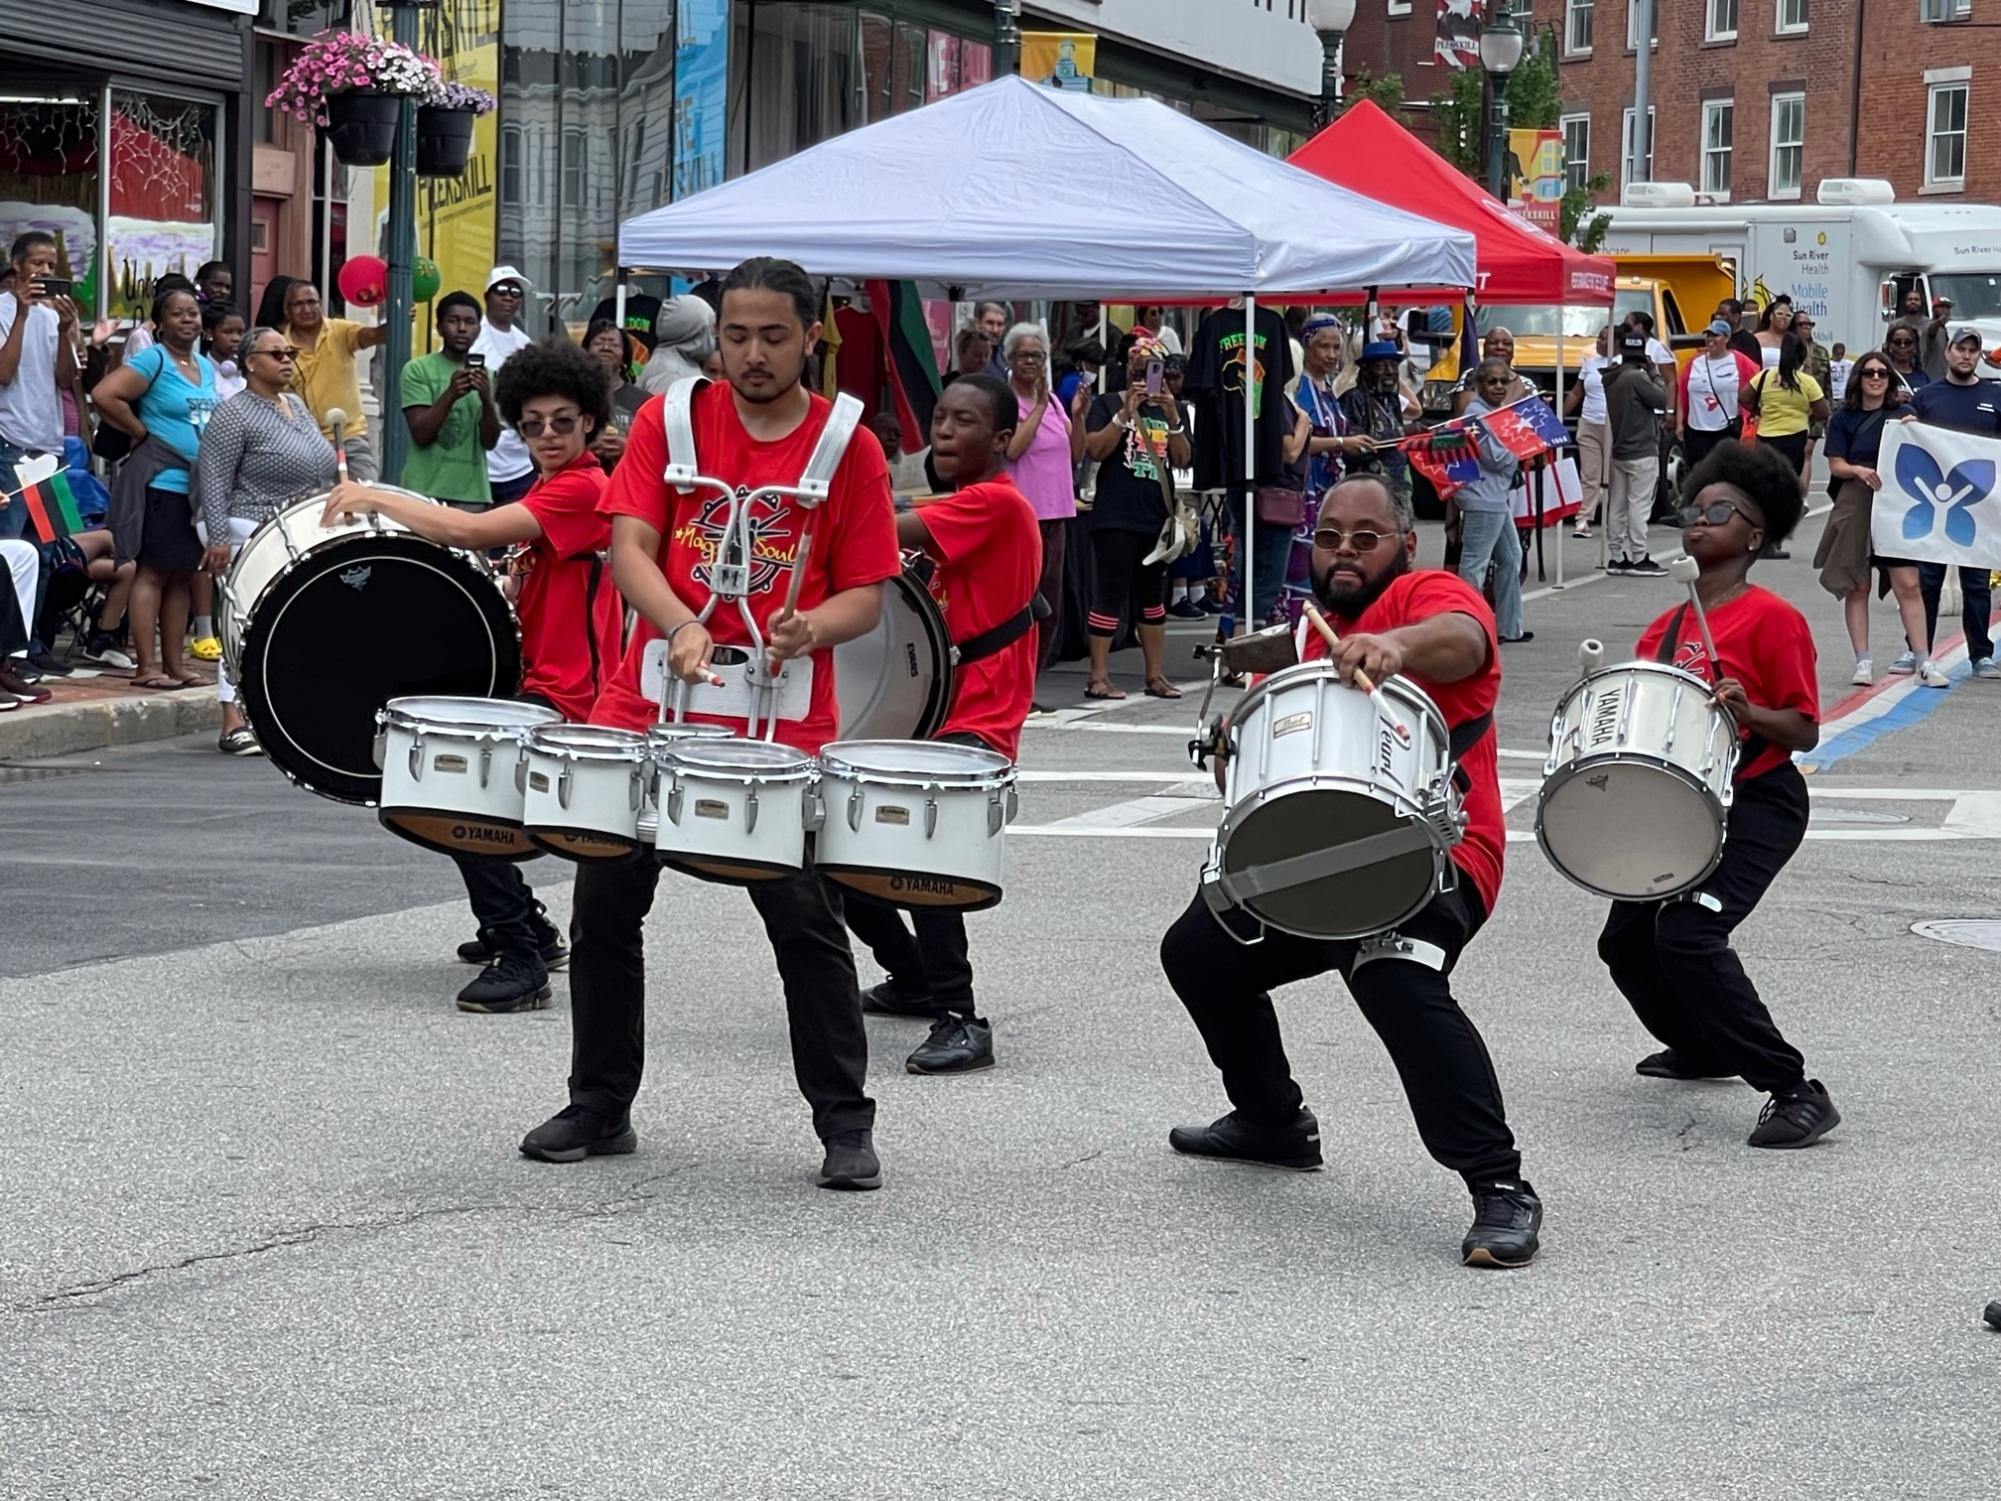 Peekskill+celebrates+Juneteenth+with+Parade+and+Festival+Saturday